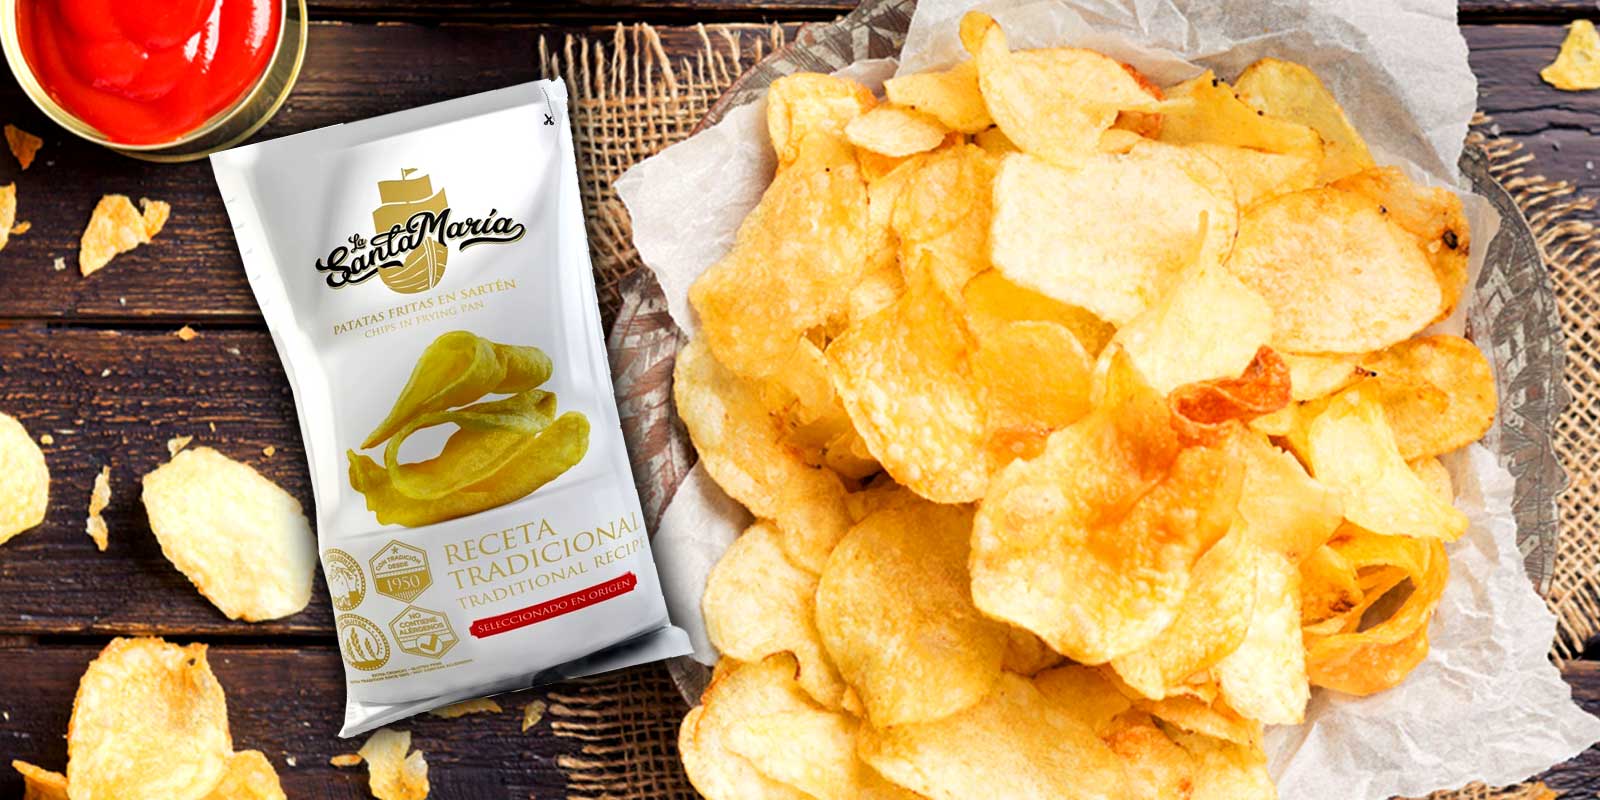 CHIPS made from potatoes or durum wheat 